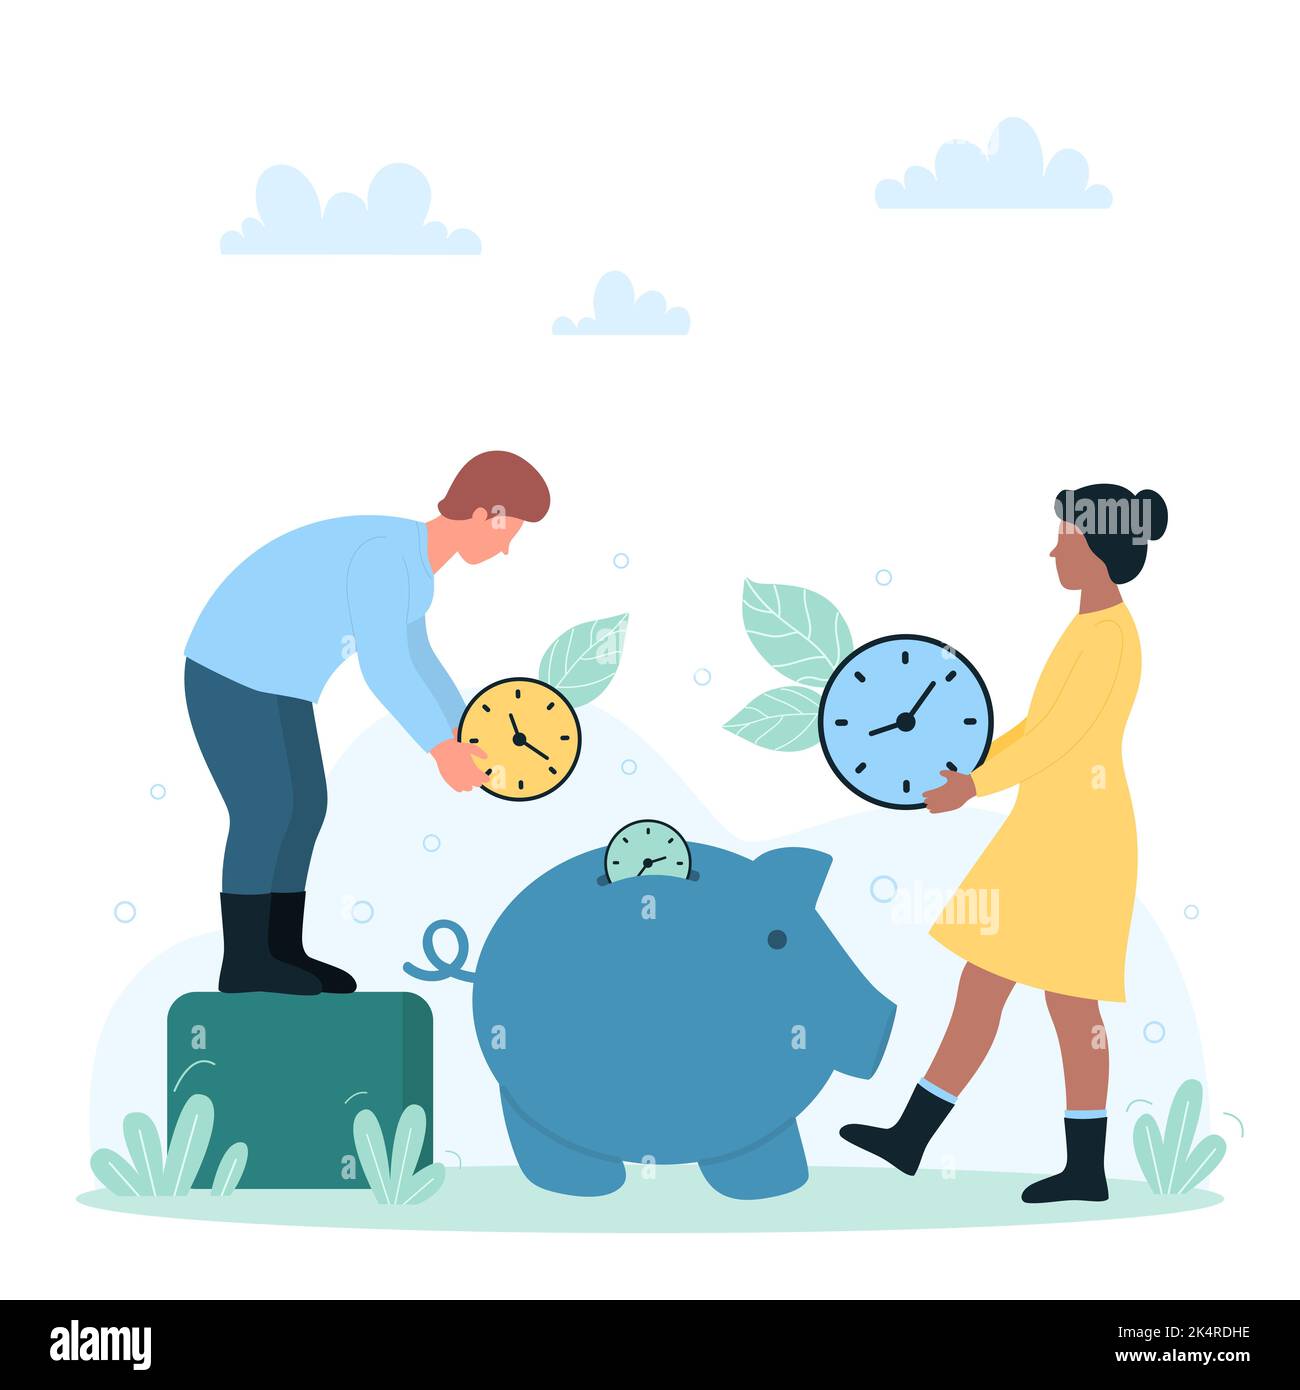 Time saving and control vector illustration. Cartoon rich tiny people throw clocks into piggy bank, make money and save time, efficiency of work hours of employees for future company development Stock Vector